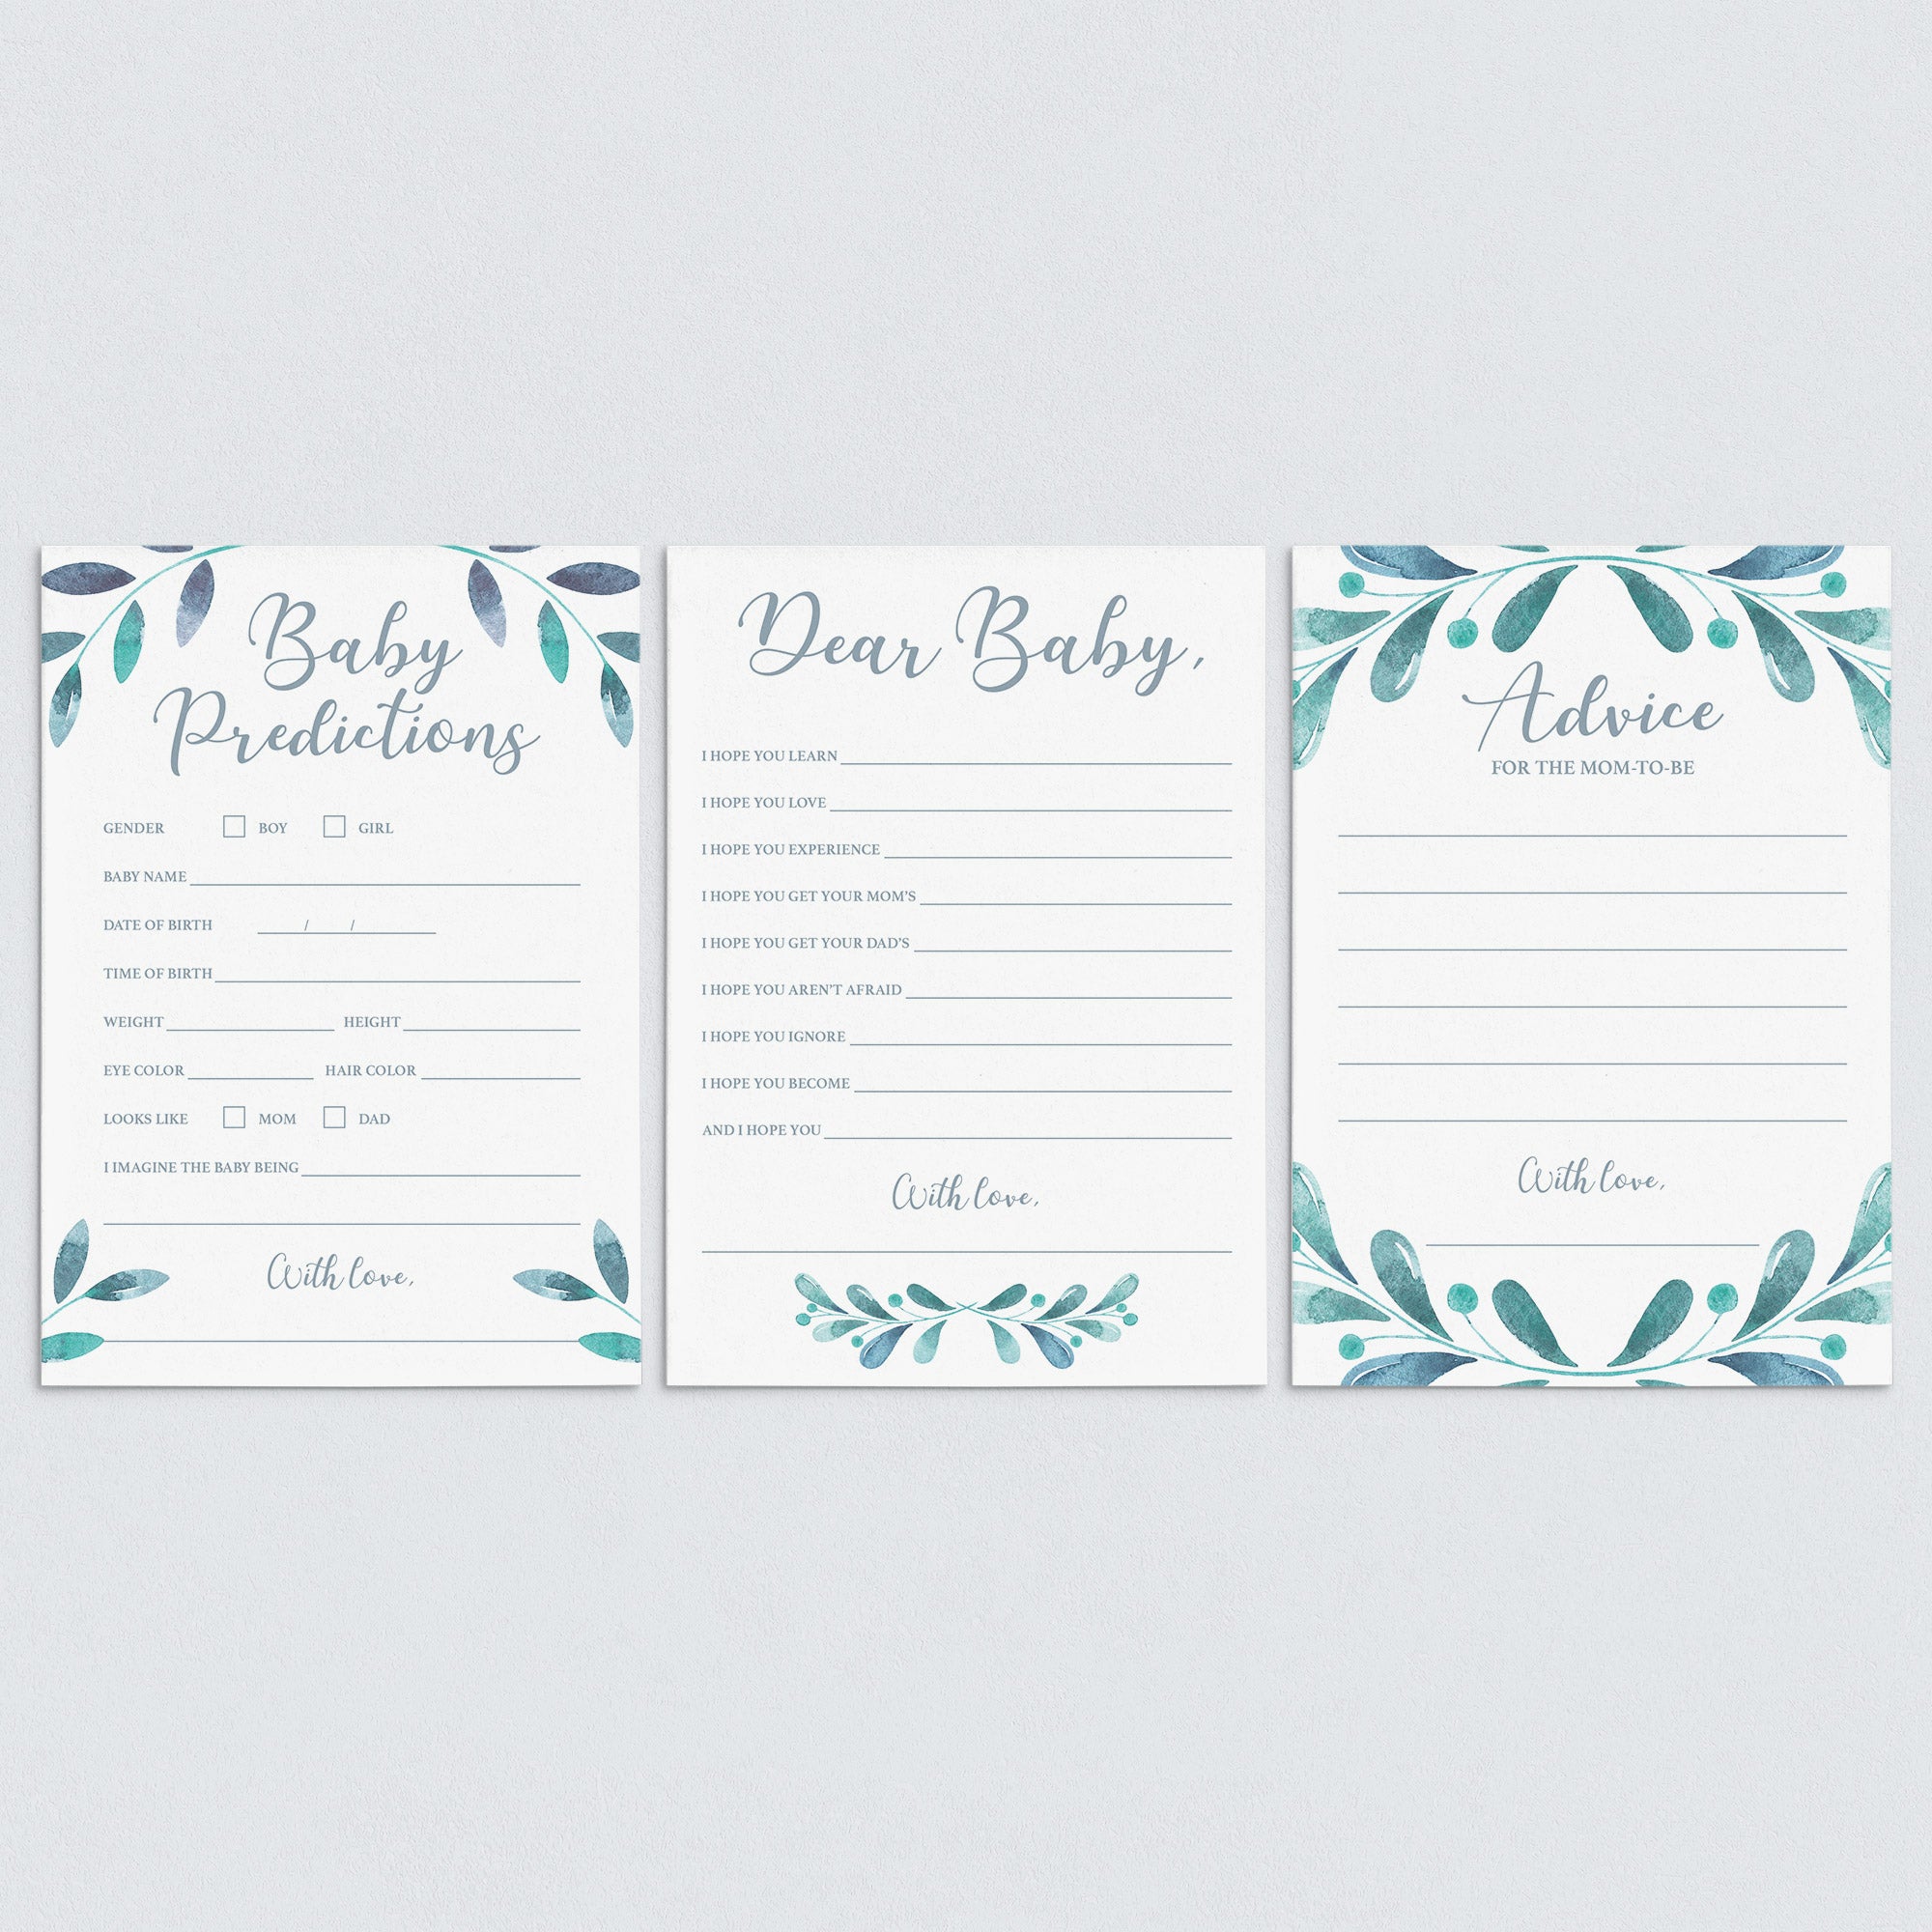 Winter baby shower games bundle set of 3 printable by LittleSizzle